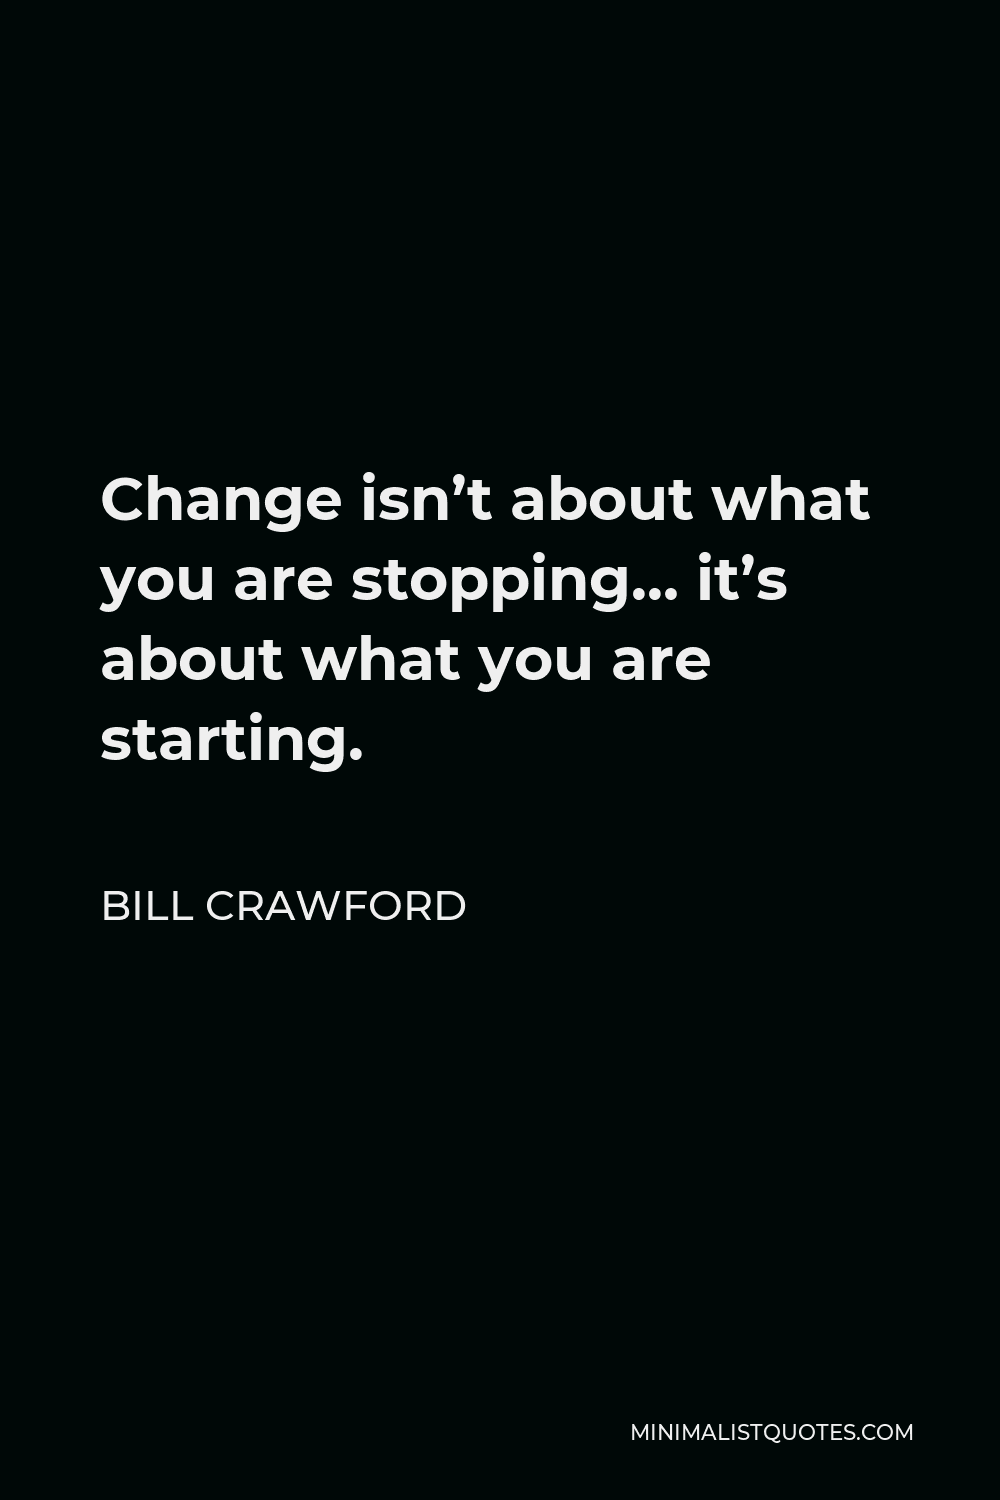 Bill Crawford Quote - Change isn’t about what you are stopping… it’s about what you are starting.